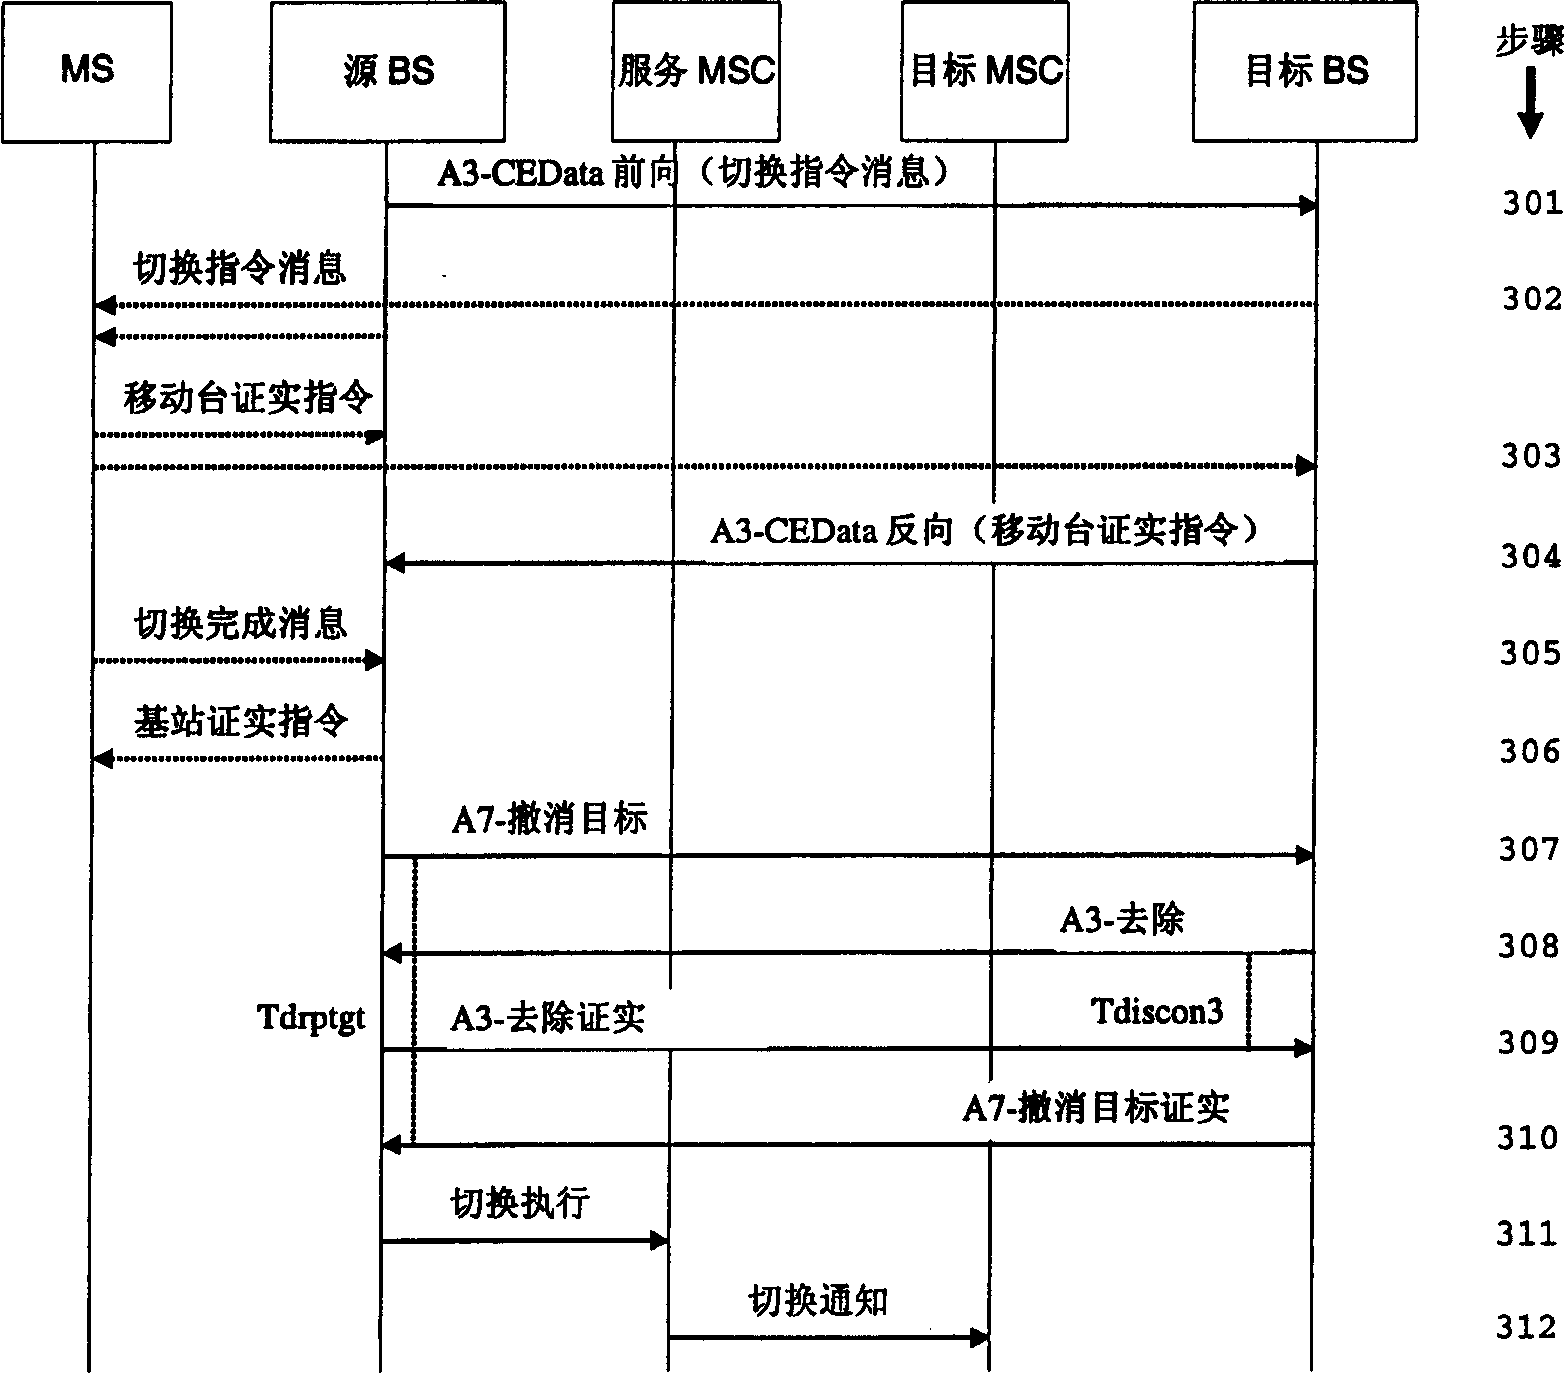 Soft switching method between mobile switching center in CDMA 2000 1X mobile communication system